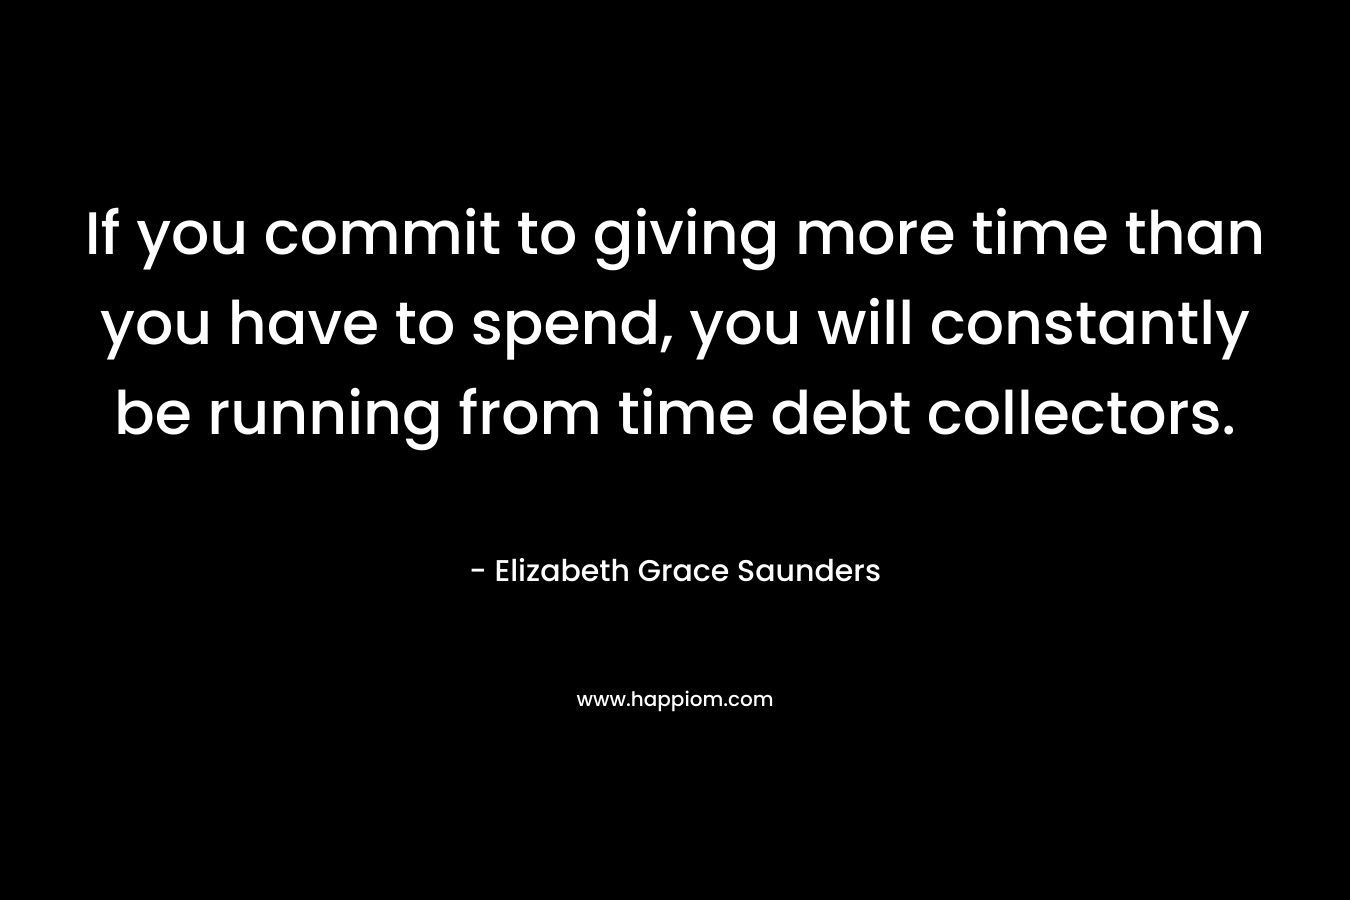 If you commit to giving more time than you have to spend, you will constantly be running from time debt collectors.